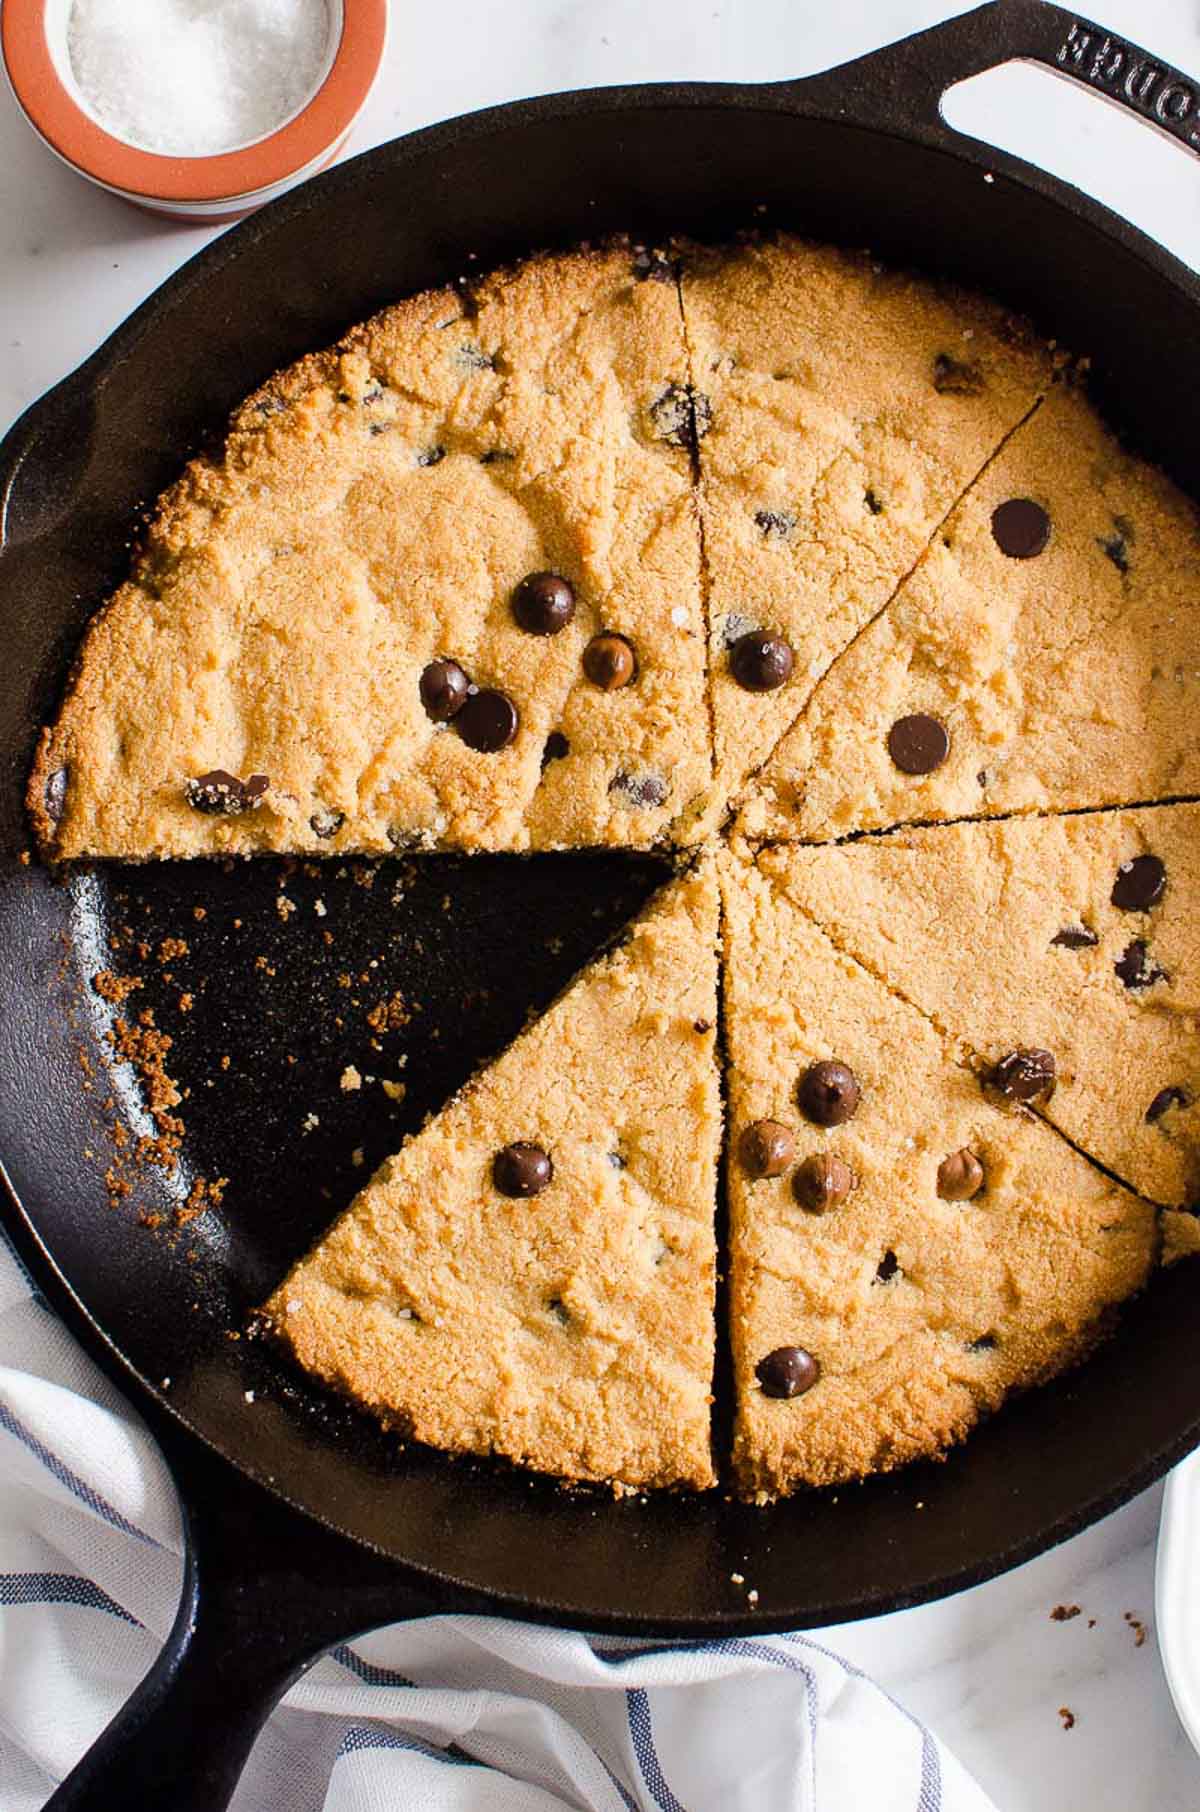 Sliced healthy skillet cookie with chocolate chips in a cast iron skillet.